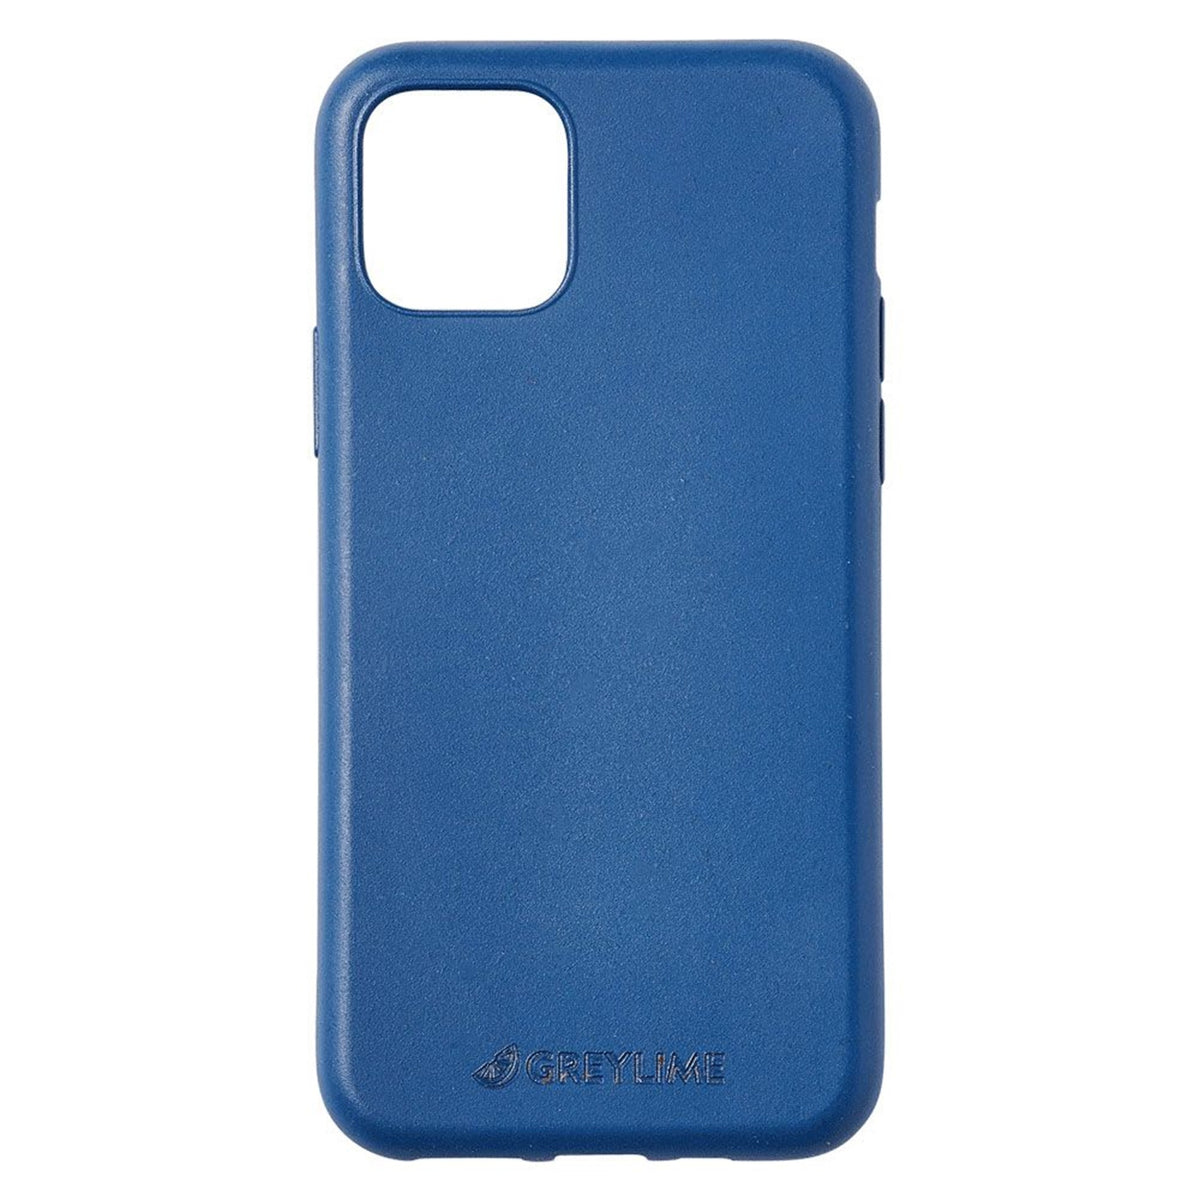 GreyLime-iPhone-11-Pro-Max-biodegradable-cover-Navy-Blue-COIP11PM03-V4.jpg